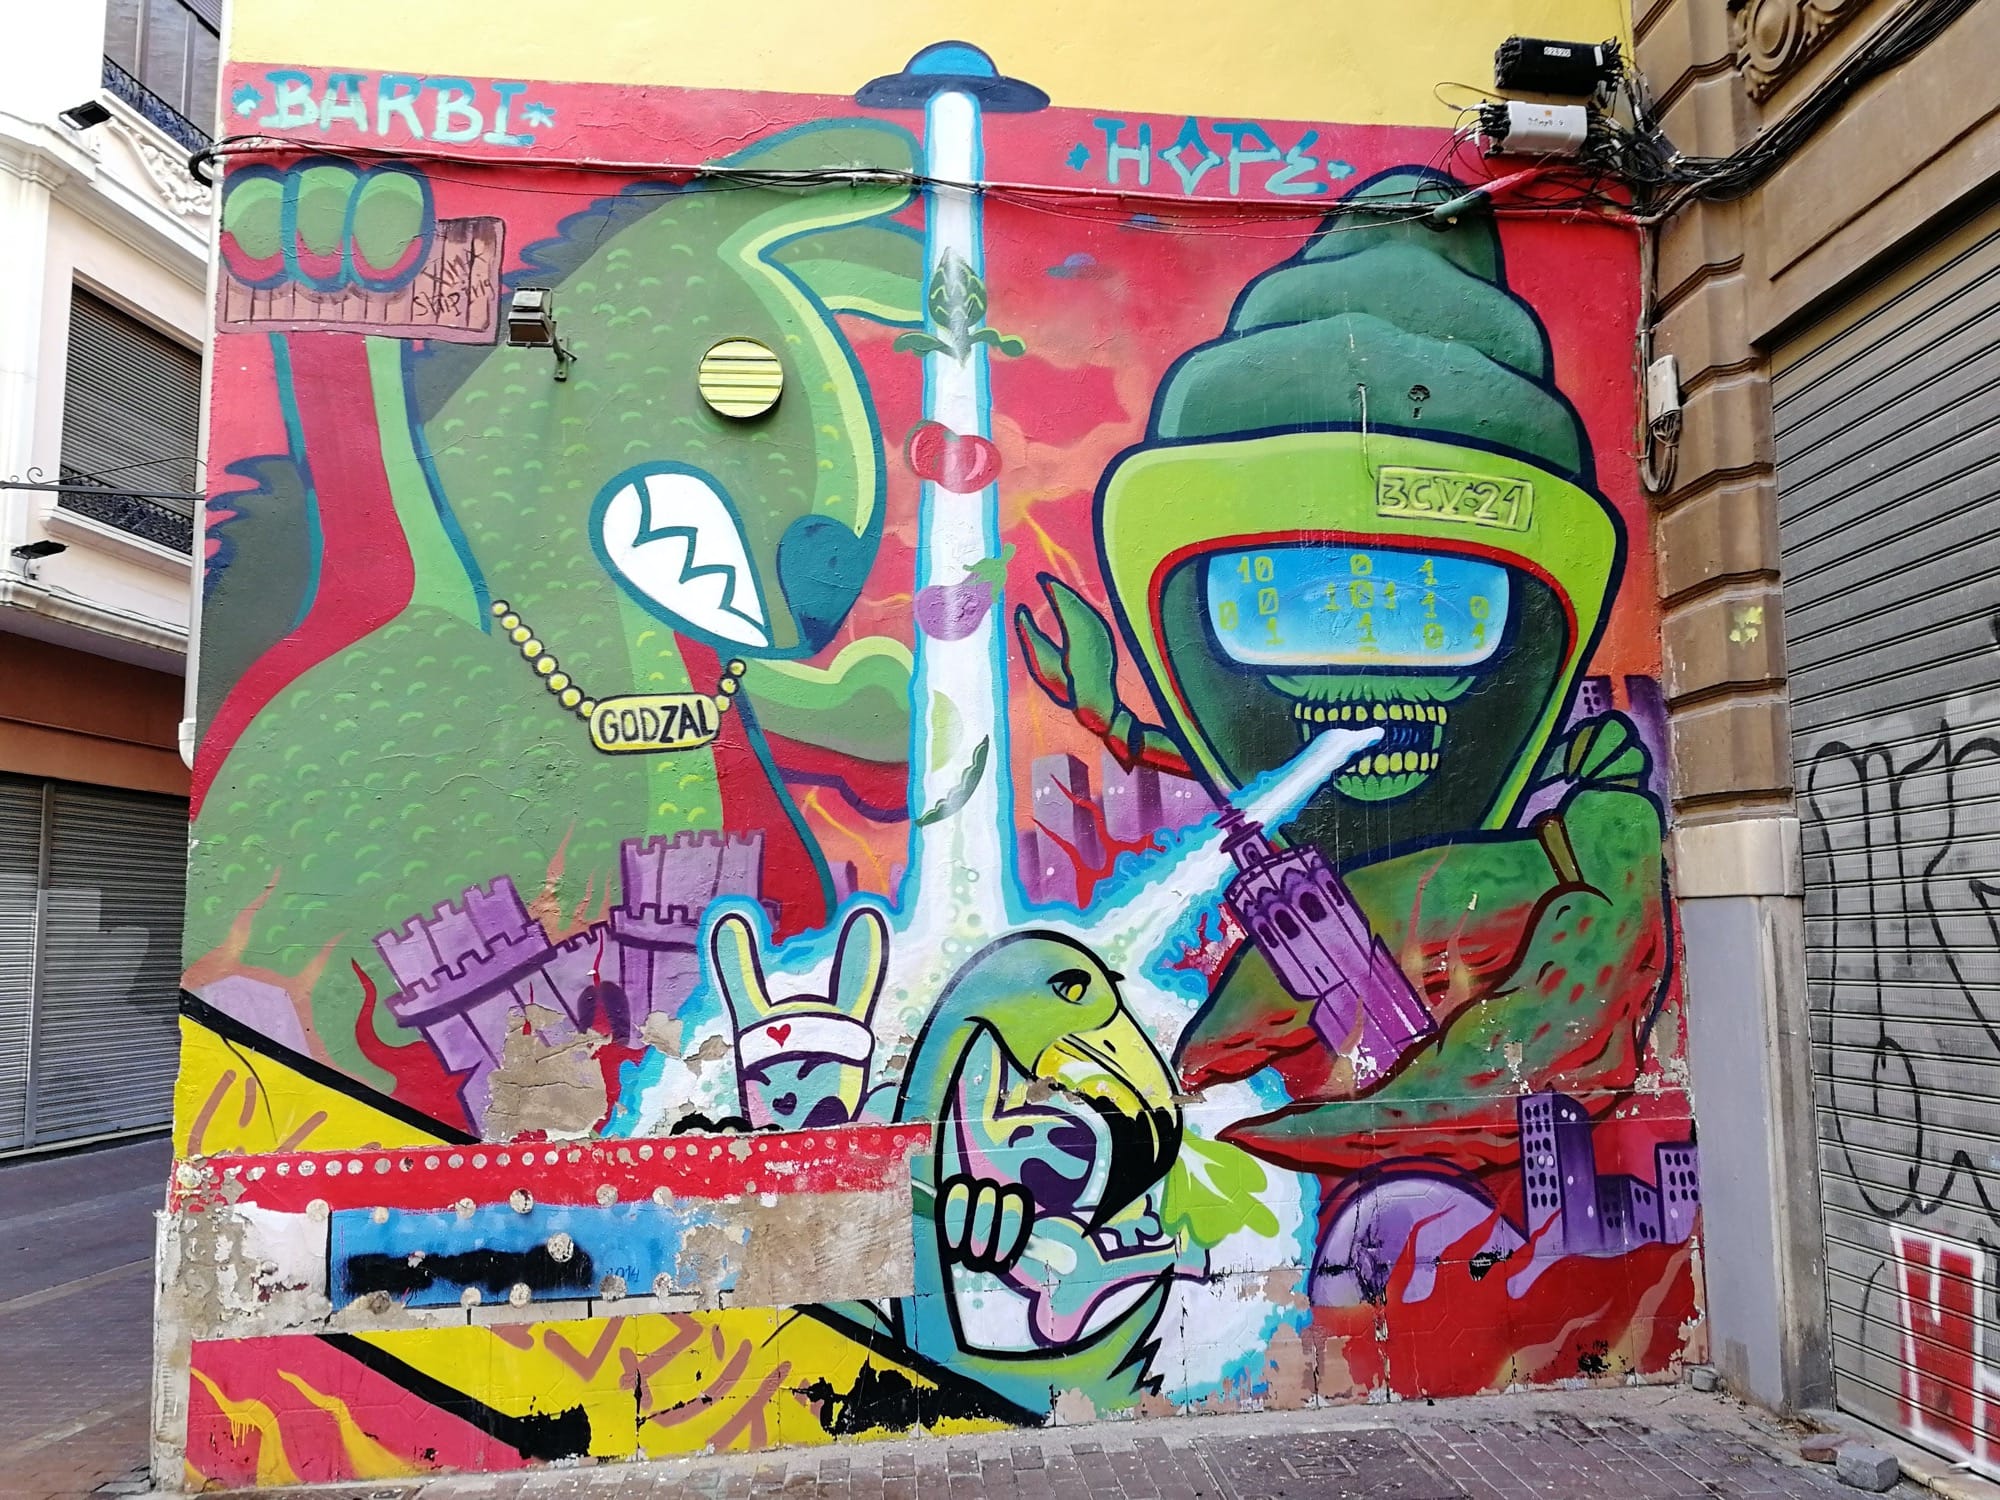 Graffiti 3732  by the artist Barbi captured by Rabot in València Spain